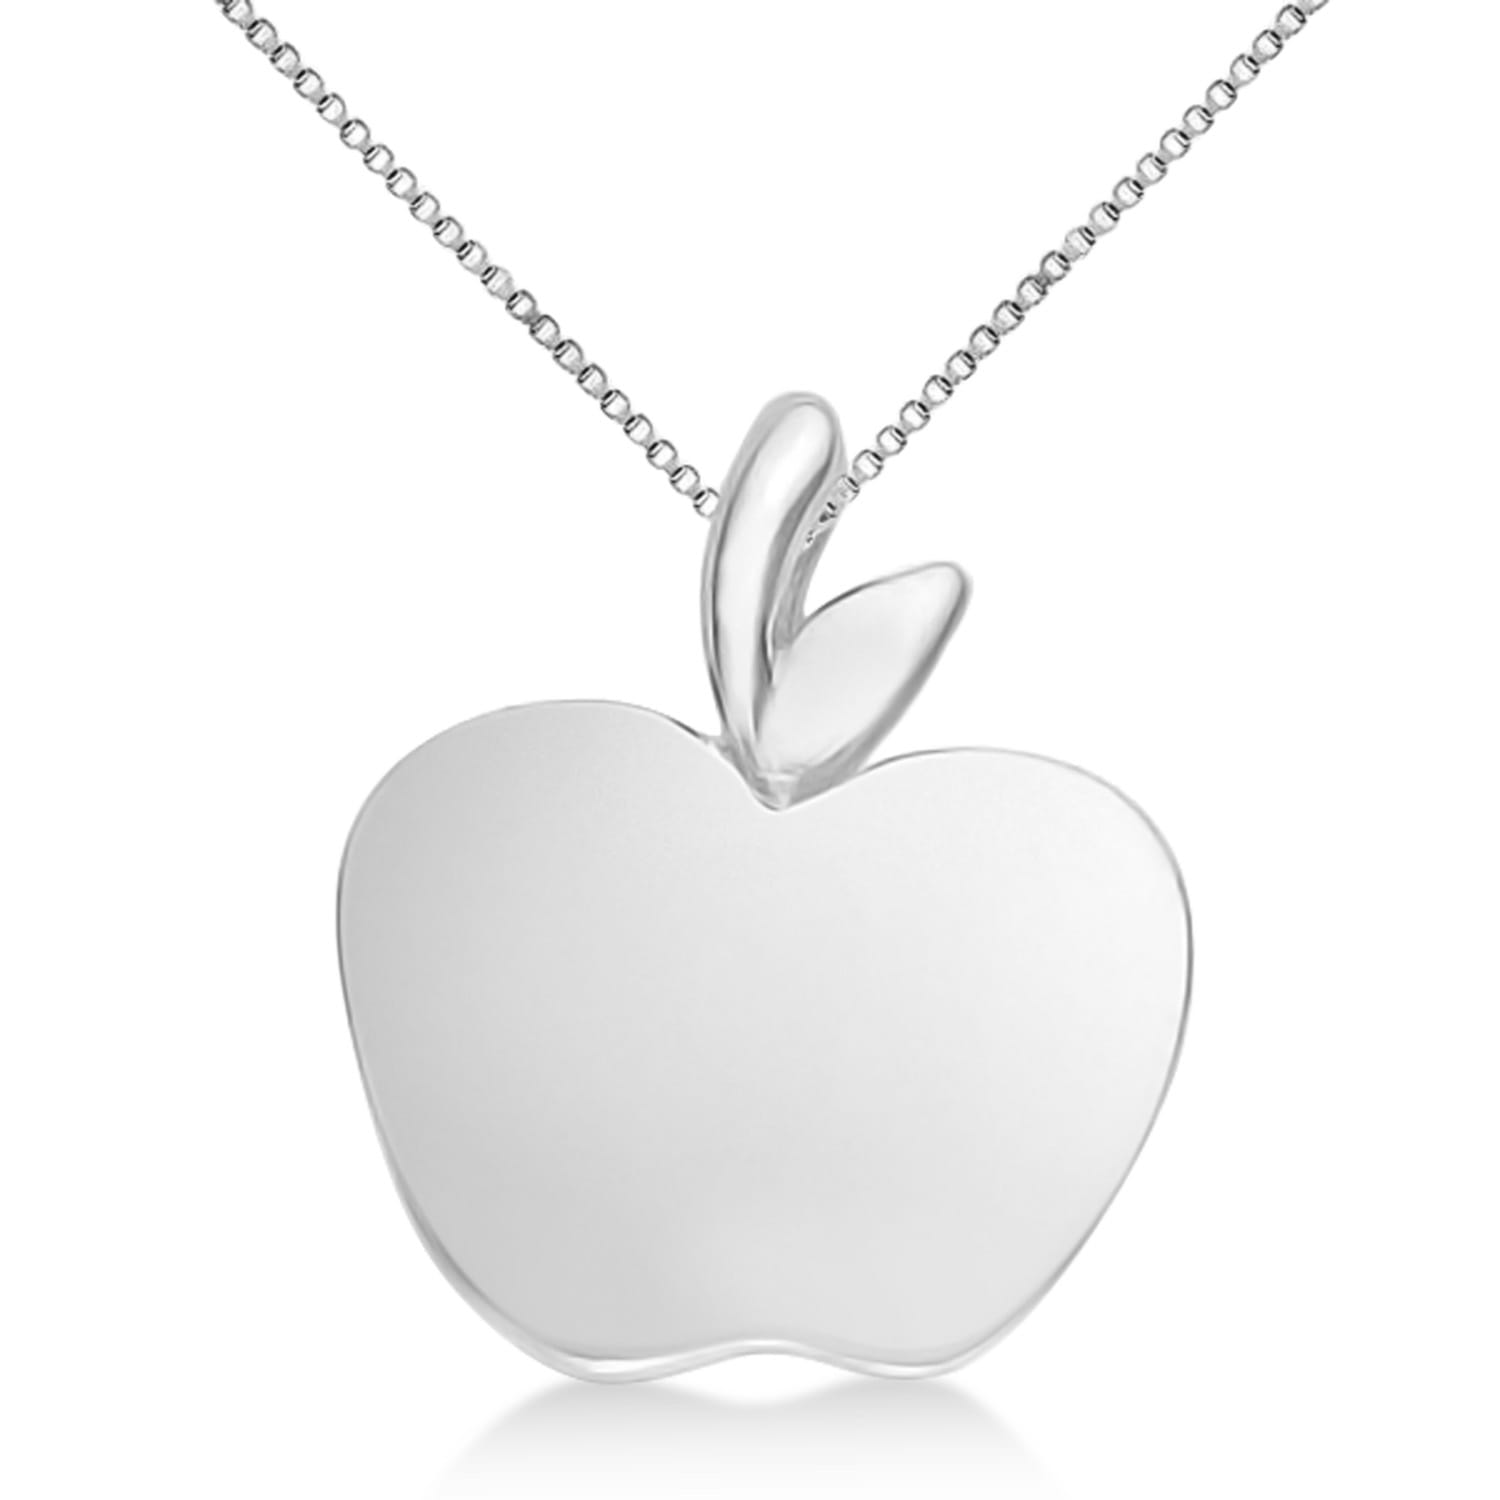 Solid Apple Pendant Necklace in Plain Metal 14k White Gold